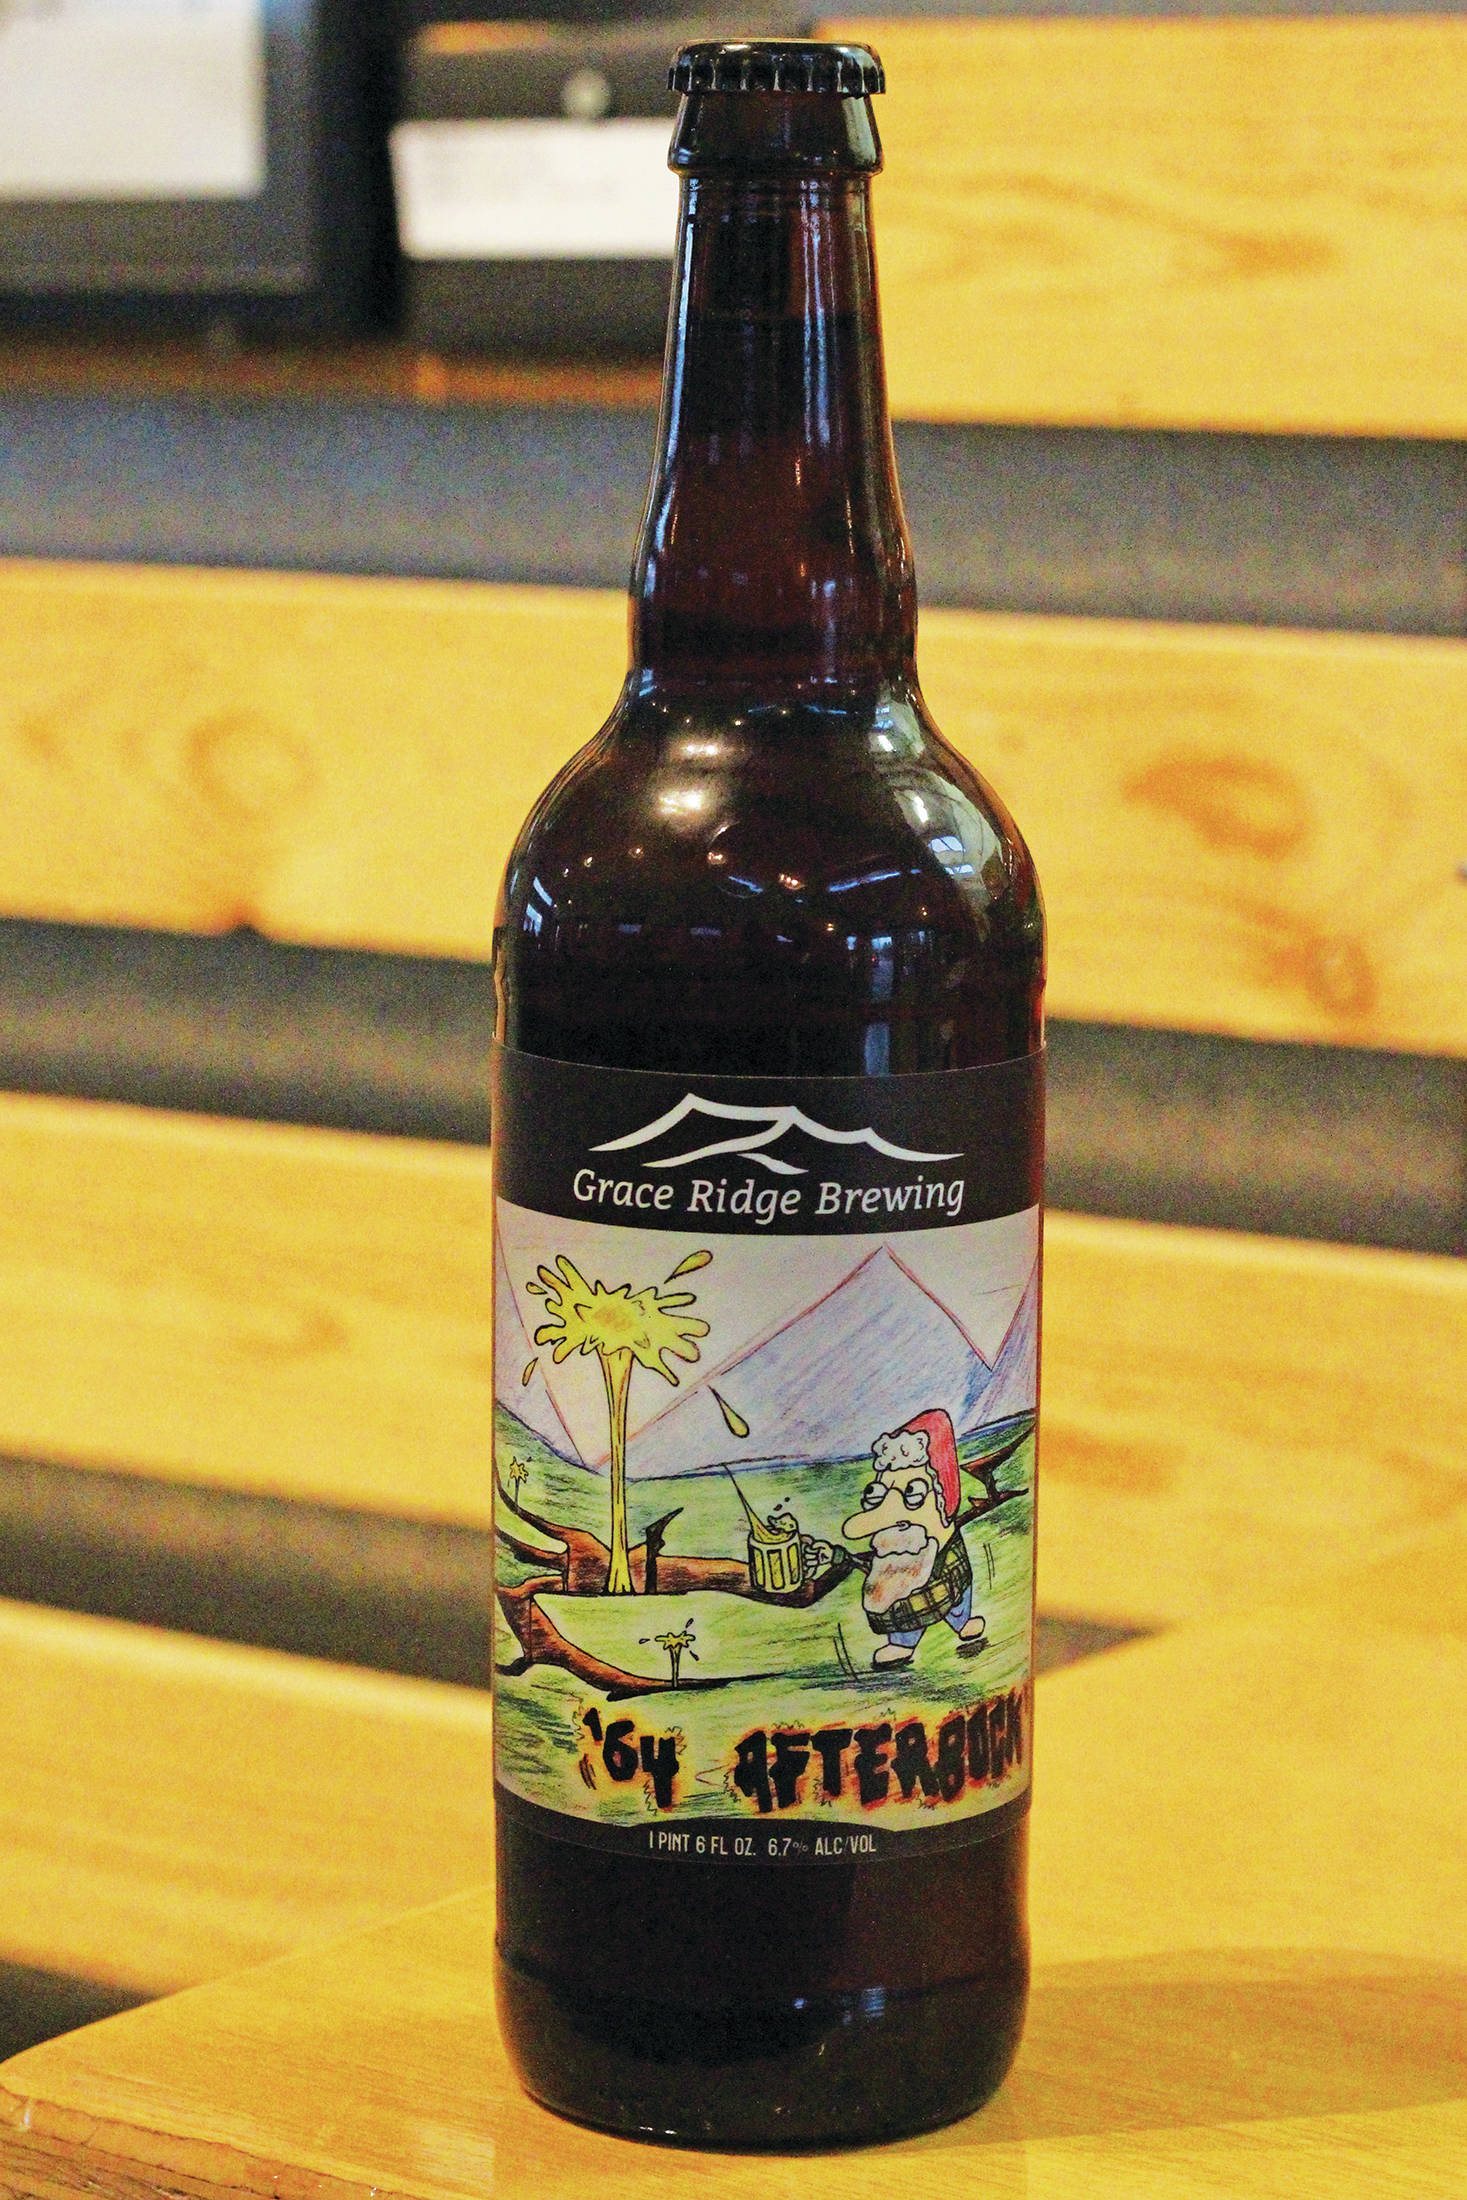 The winning design of this year’s beer label contest for Kachemak Bay National Estuarine Research Reserve adorns a bottle of Grace Ridge Brewery’s ‘64 Afterbock on Friday, Feb. 5, 2021 at the brewery in Homer, Alaska. (Photo by Megan Pacer/Homer News)